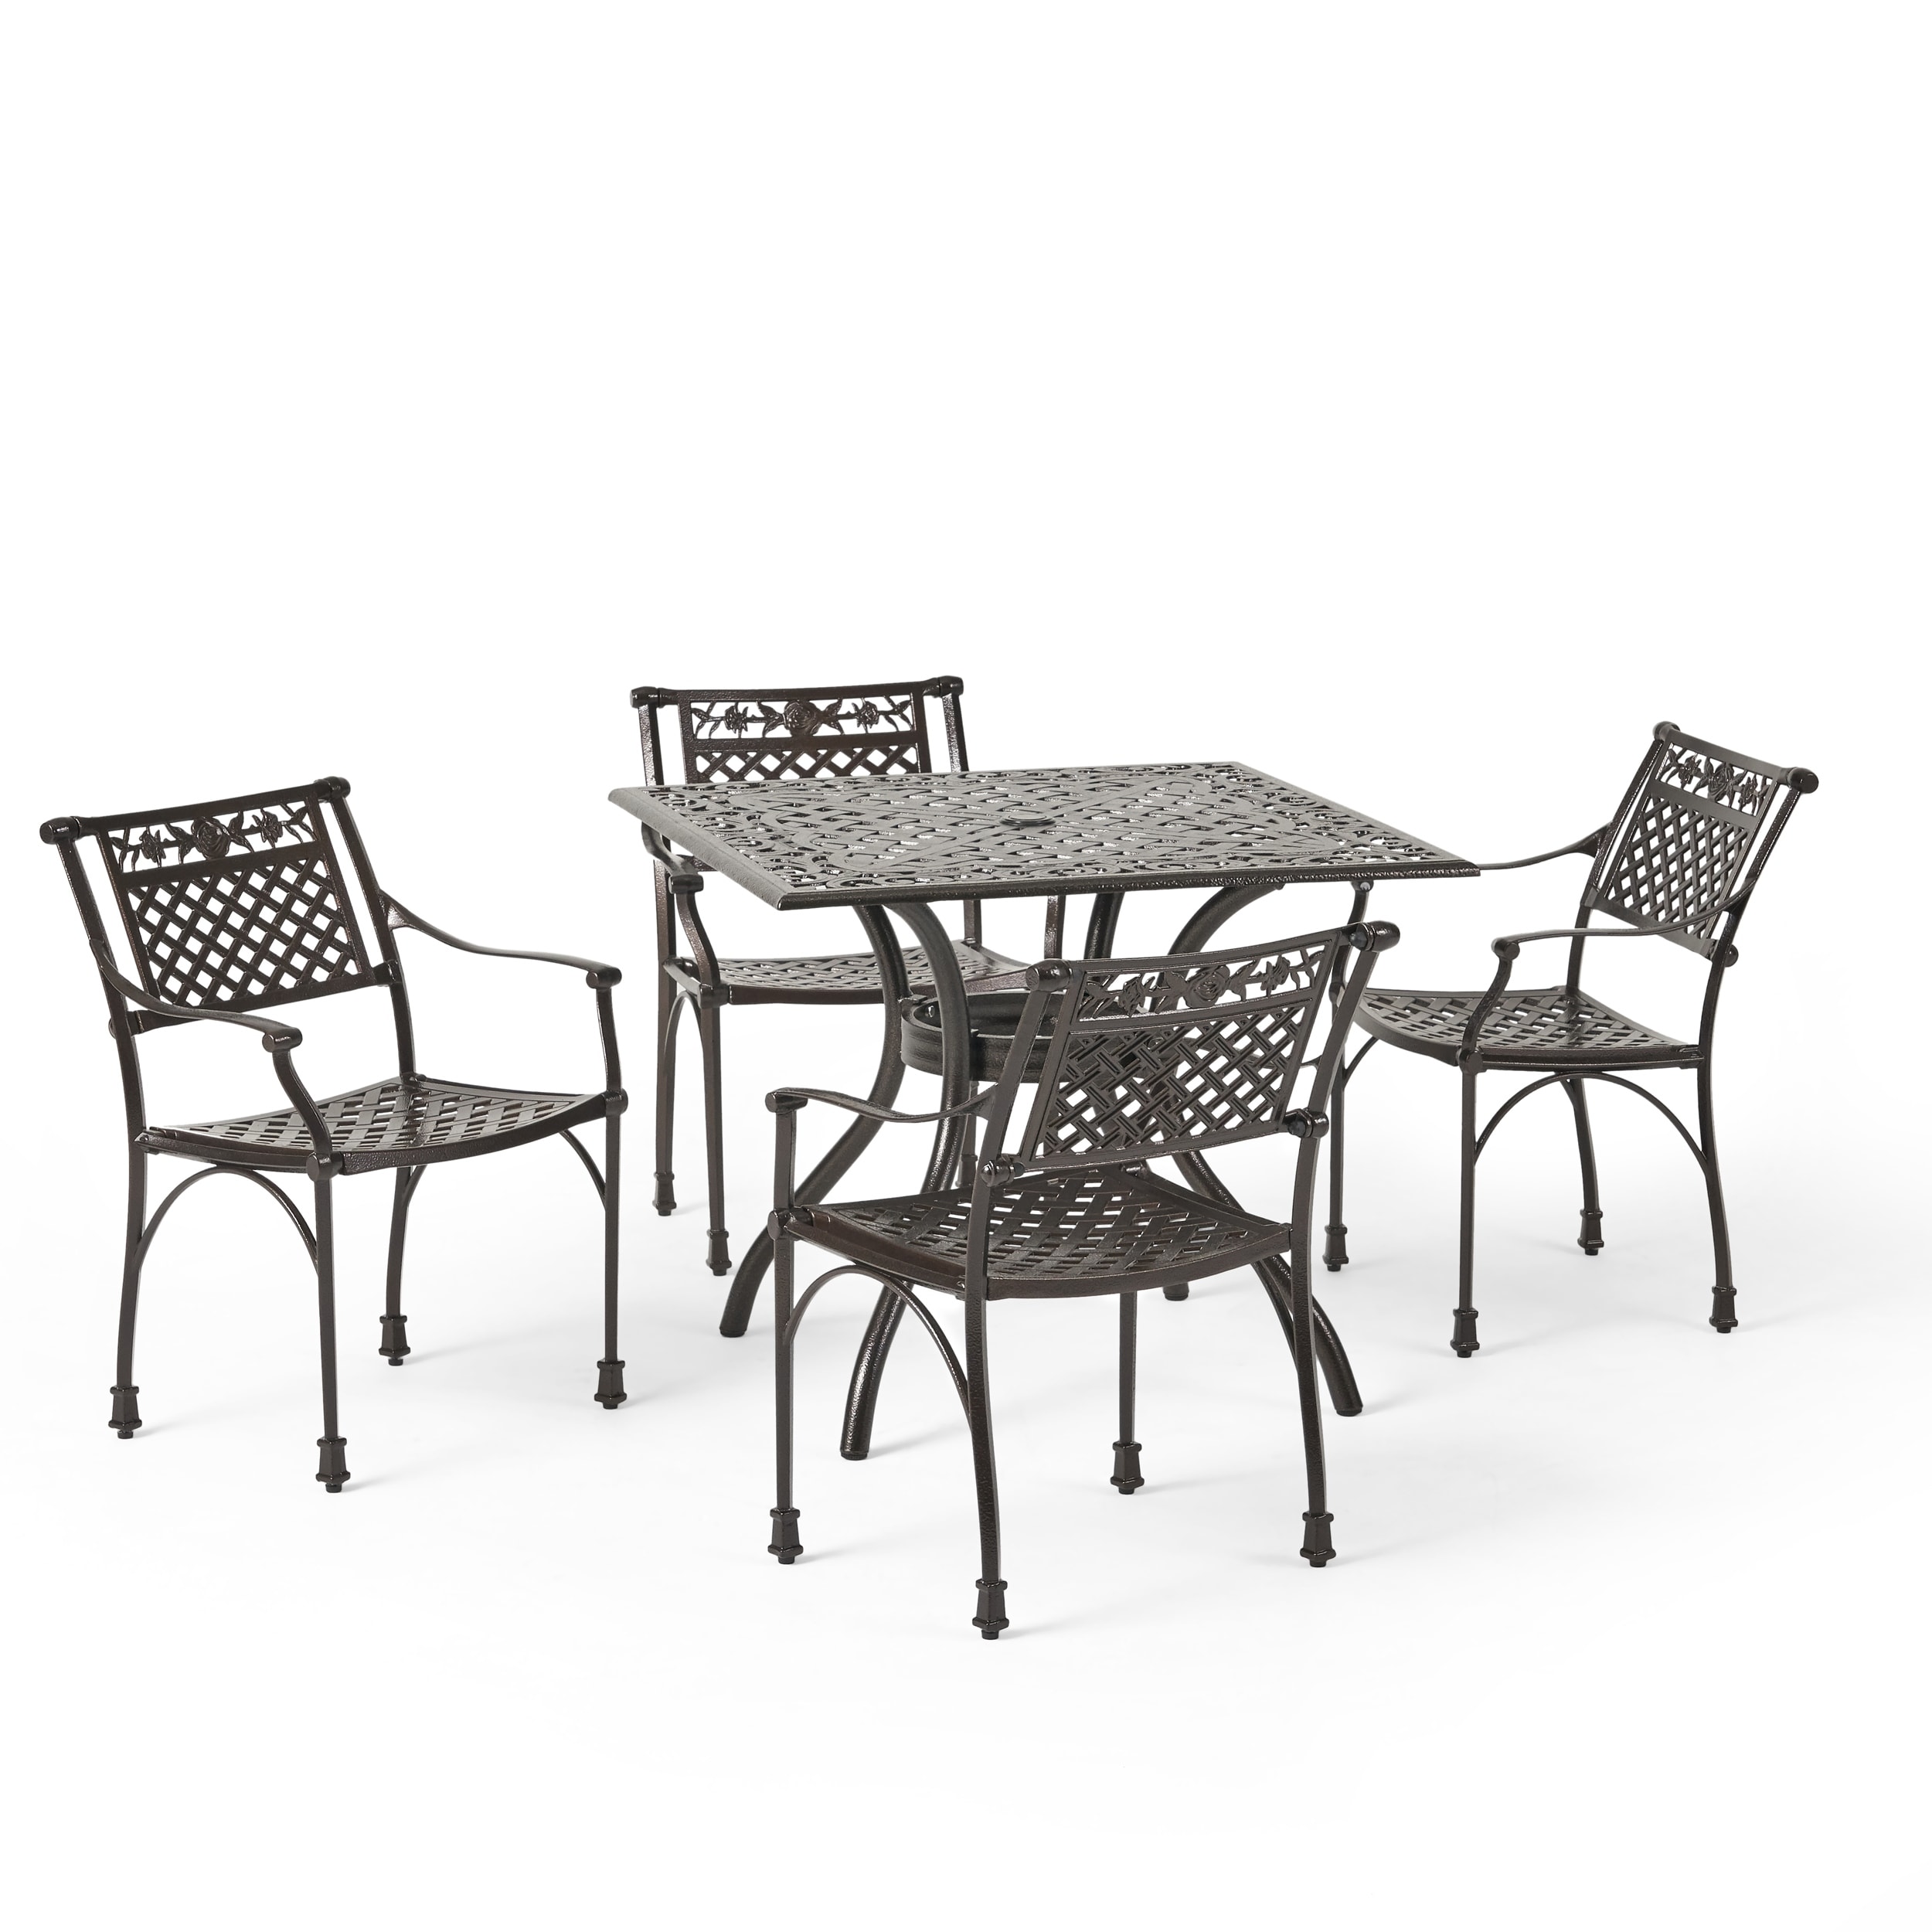 Ridgecrest 5-piece Patio Dining Set By Christopher Knight Home